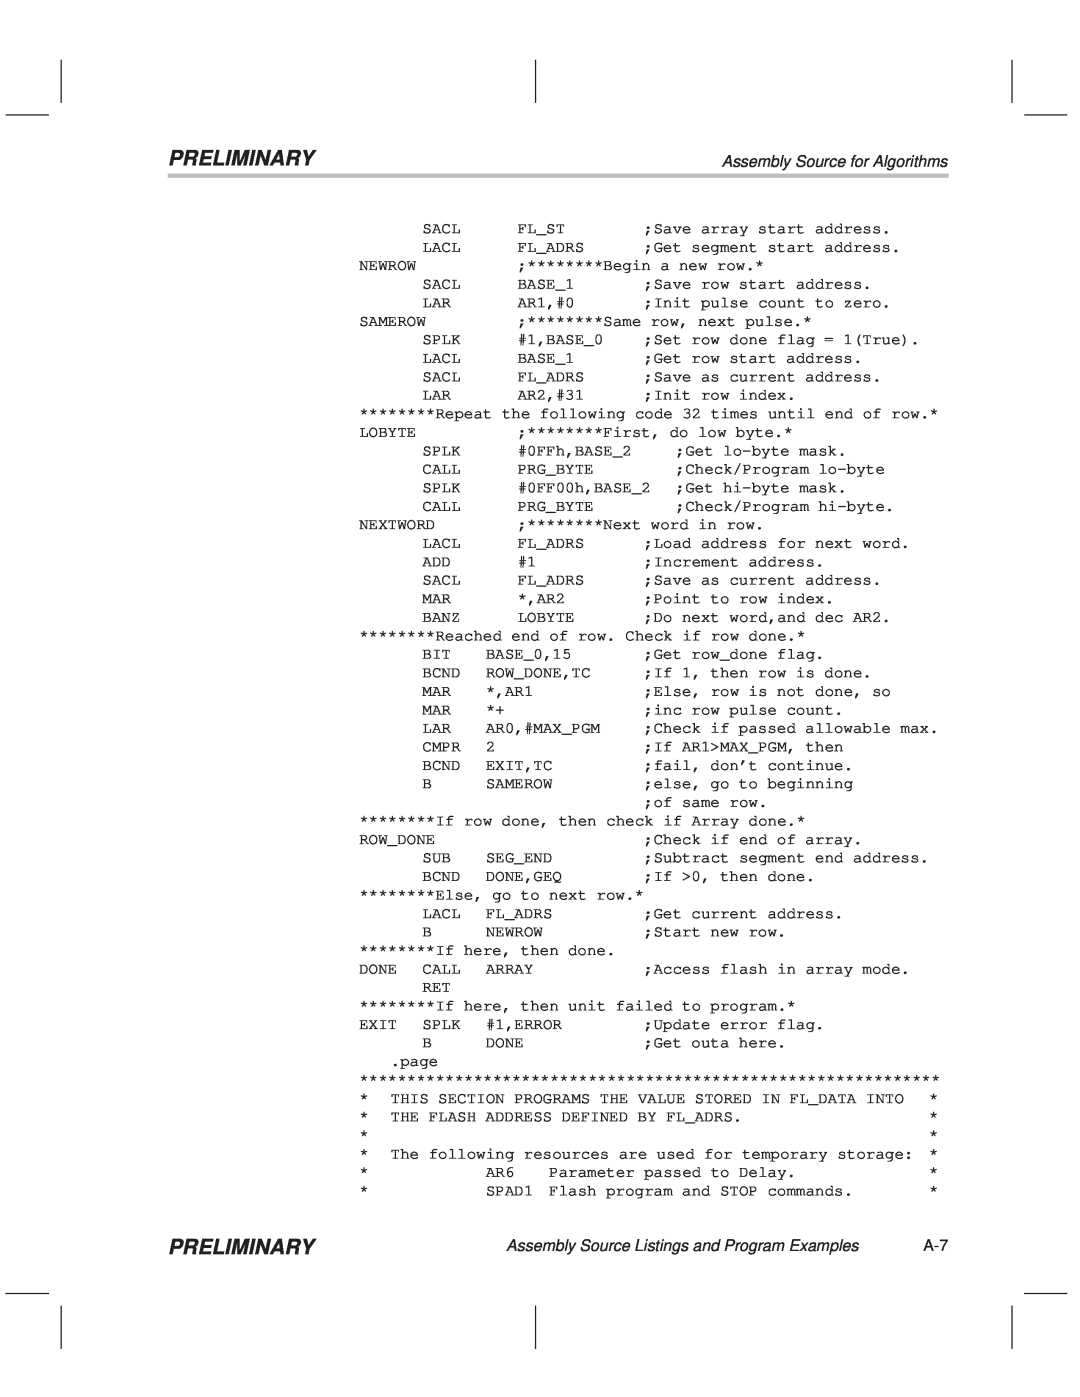 Texas Instruments TMS320F20x/F24x DSP manual Preliminary, Assembly Source for Algorithms 